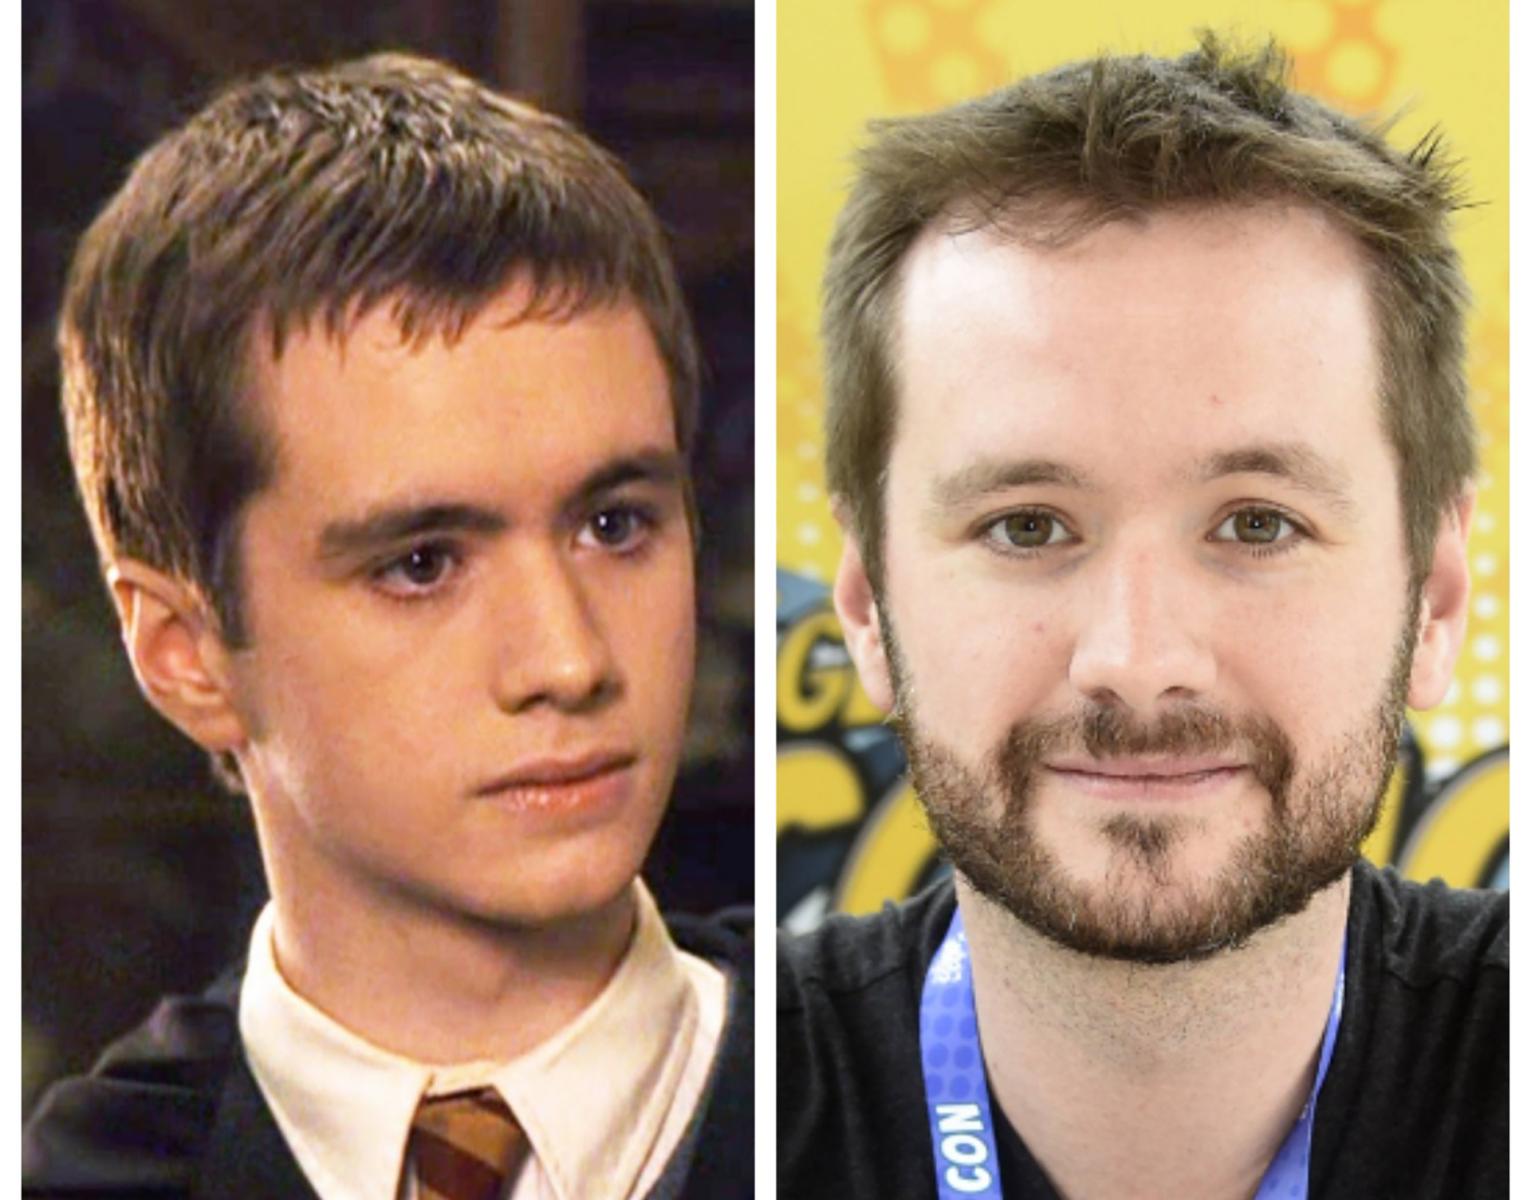 20 Years On: Here's What The Cast of Harry Potter Look Like Now - image 8